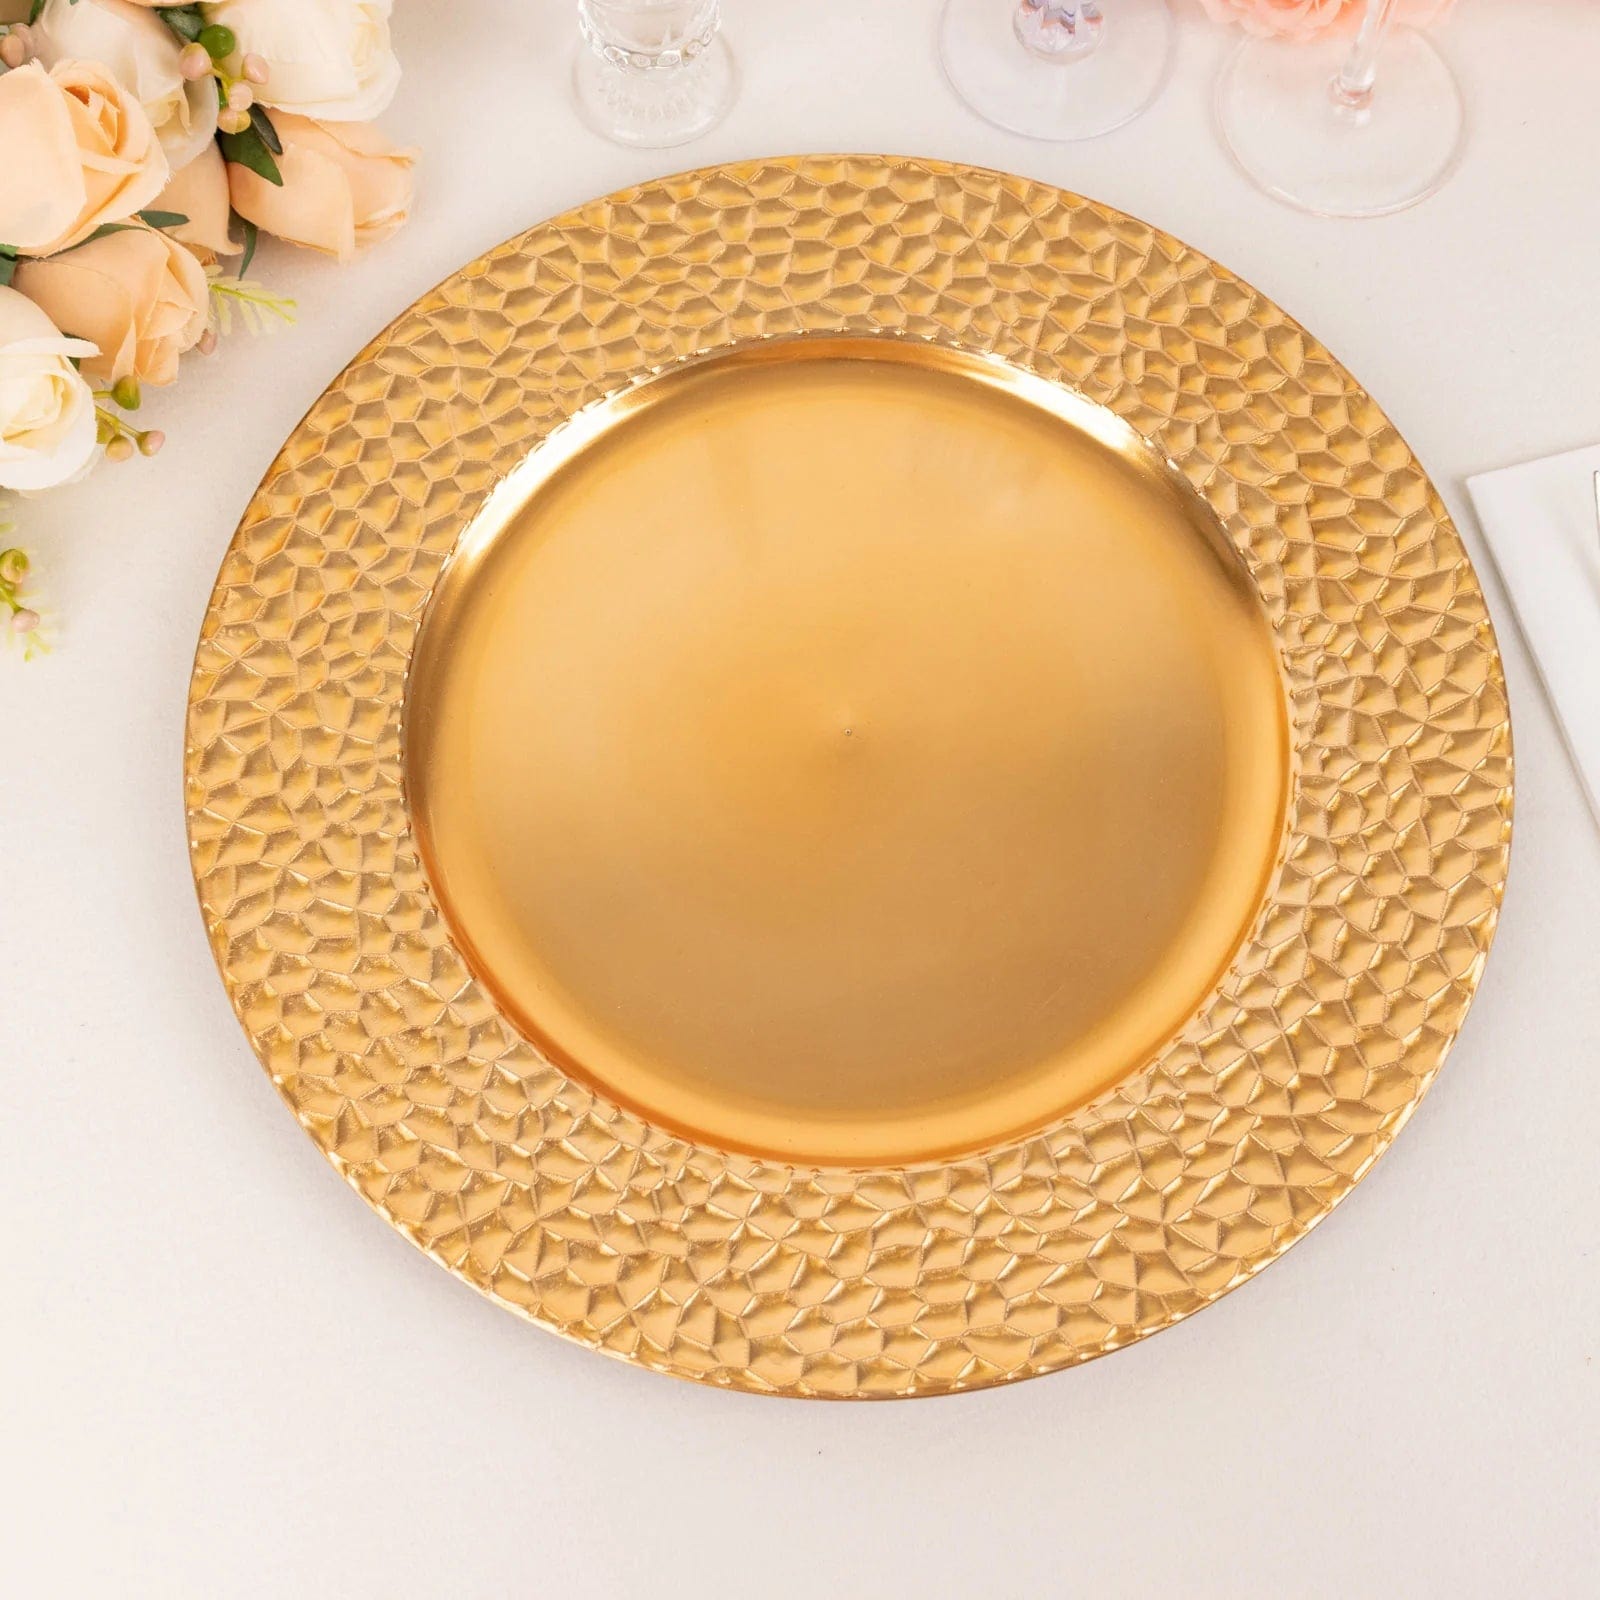 6 Metallic Gold 13 in Round Acrylic Charger Plates with Hammered Rim